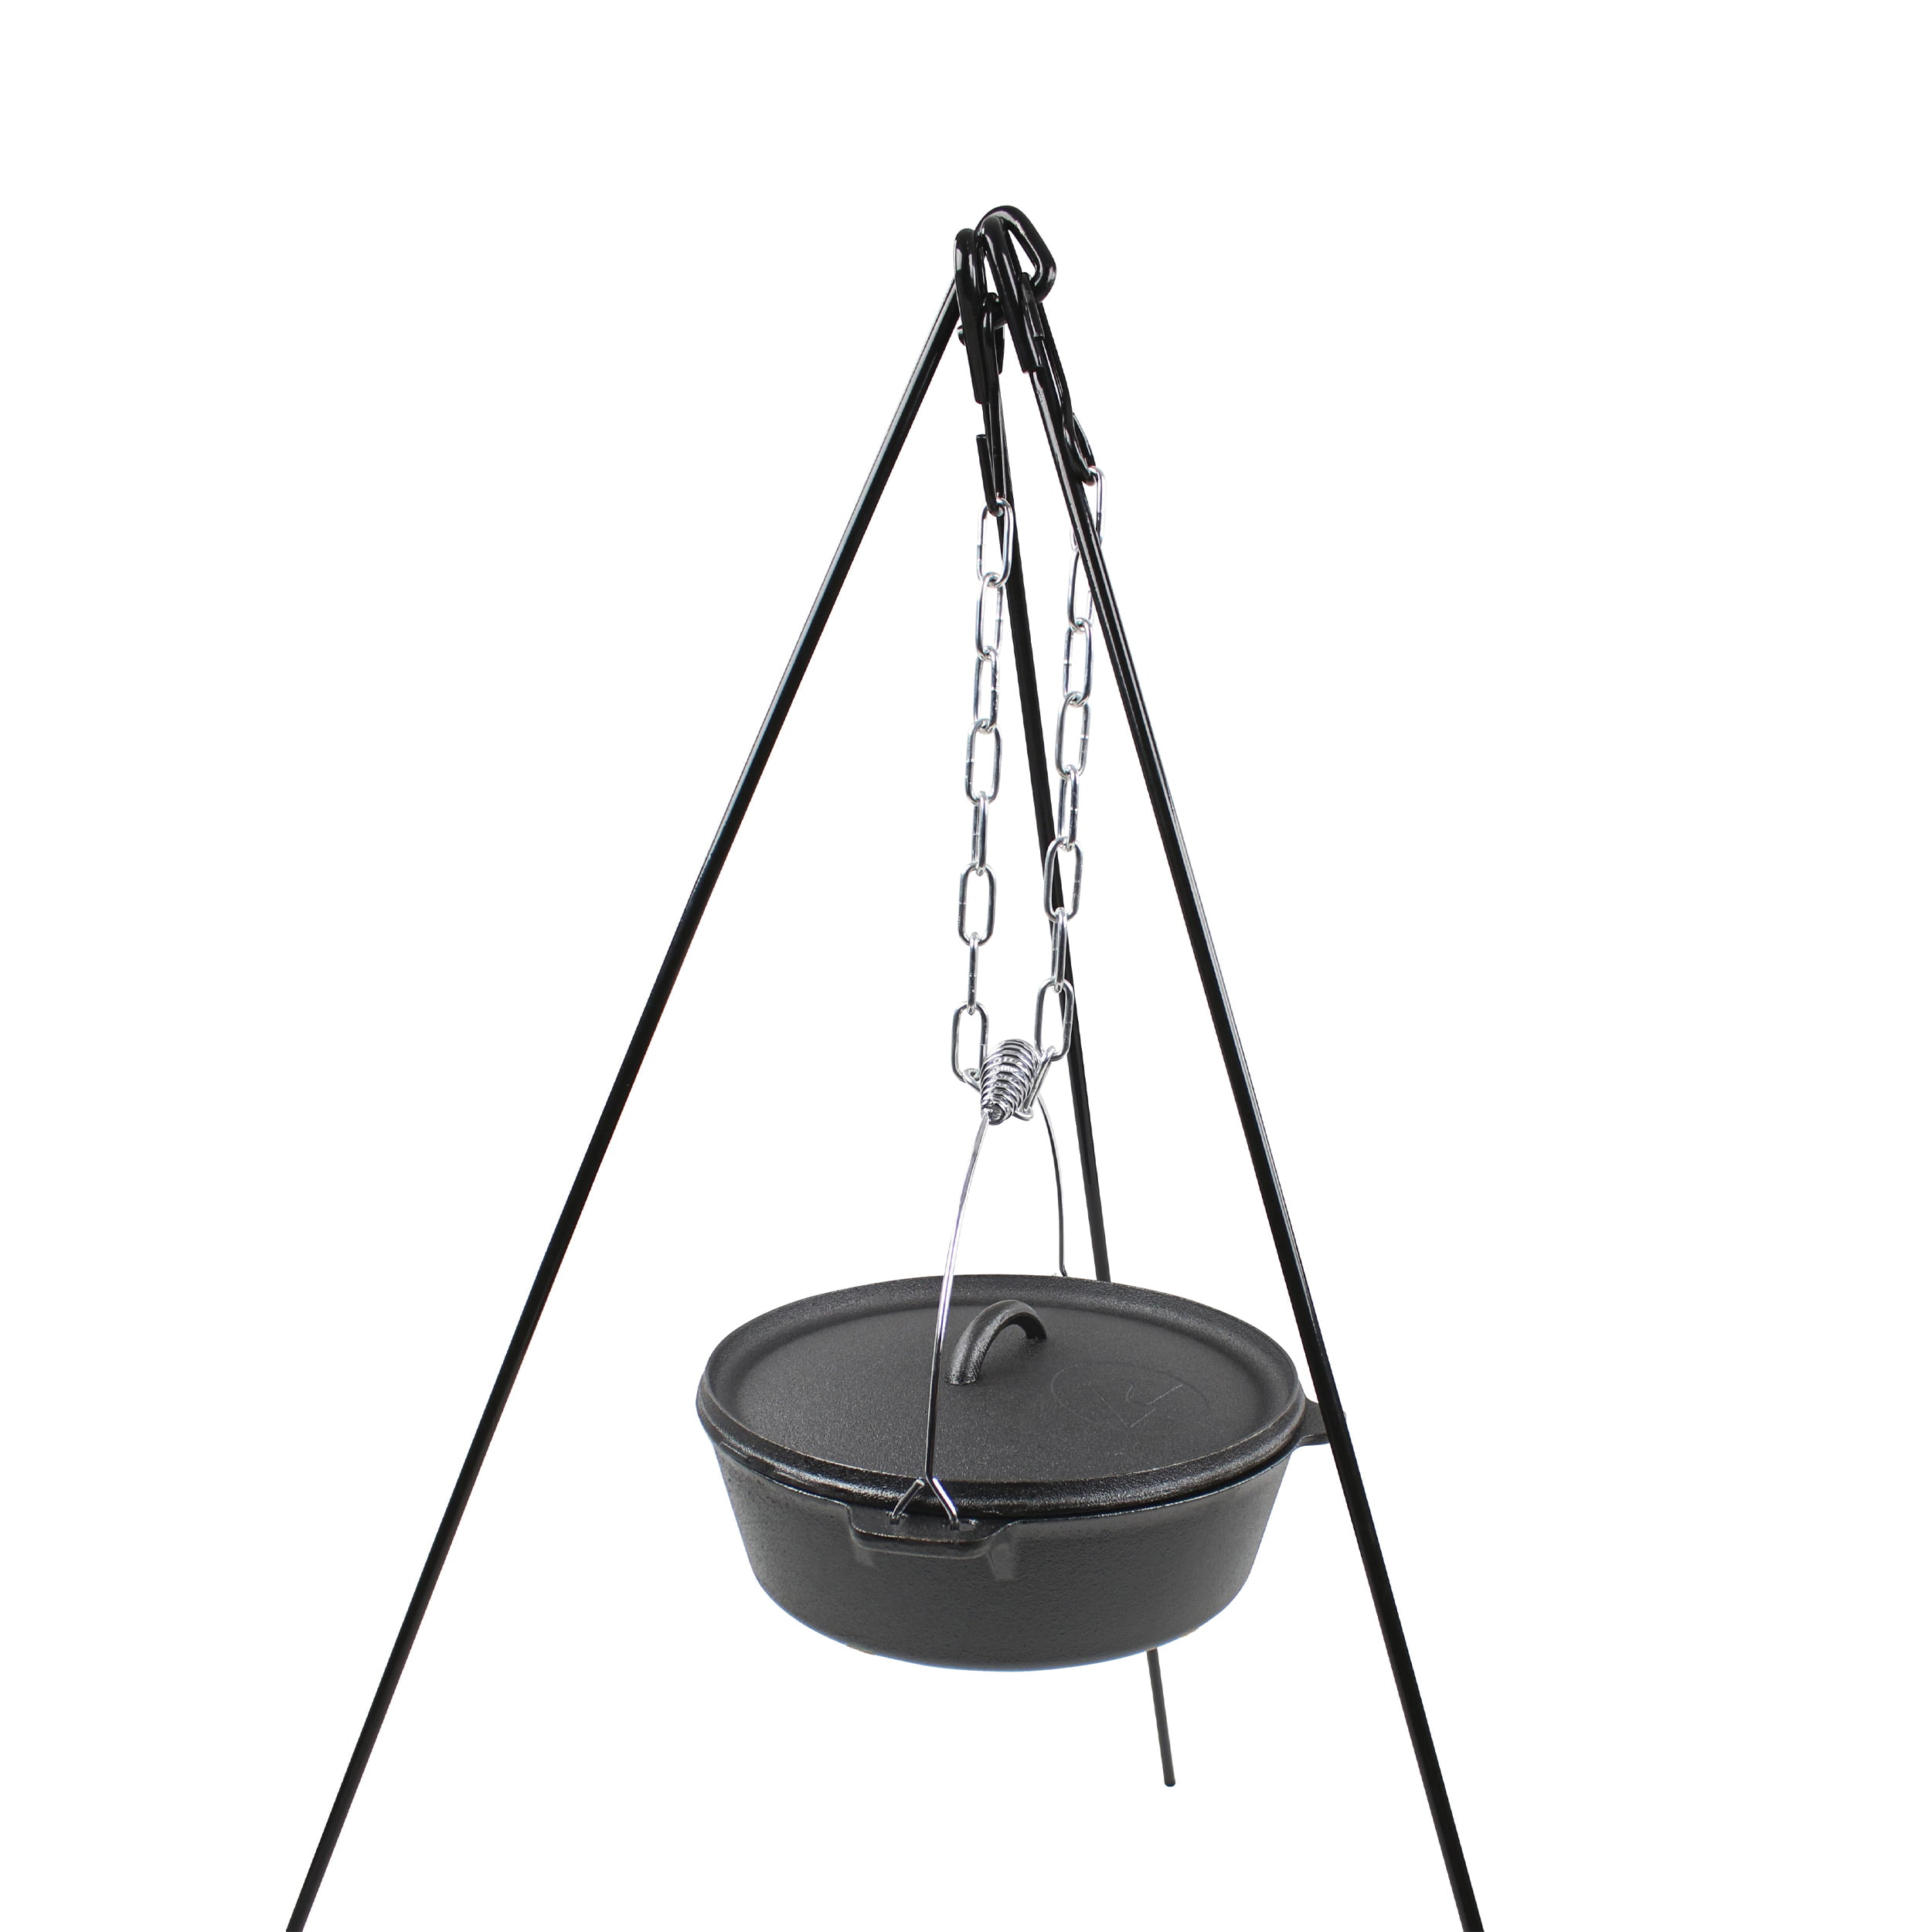 Simond Store Campfire Tripod for Cast Iron Dutch Oven Cooking, Campfire Grill for Camping. Wood, Size: 1, Black